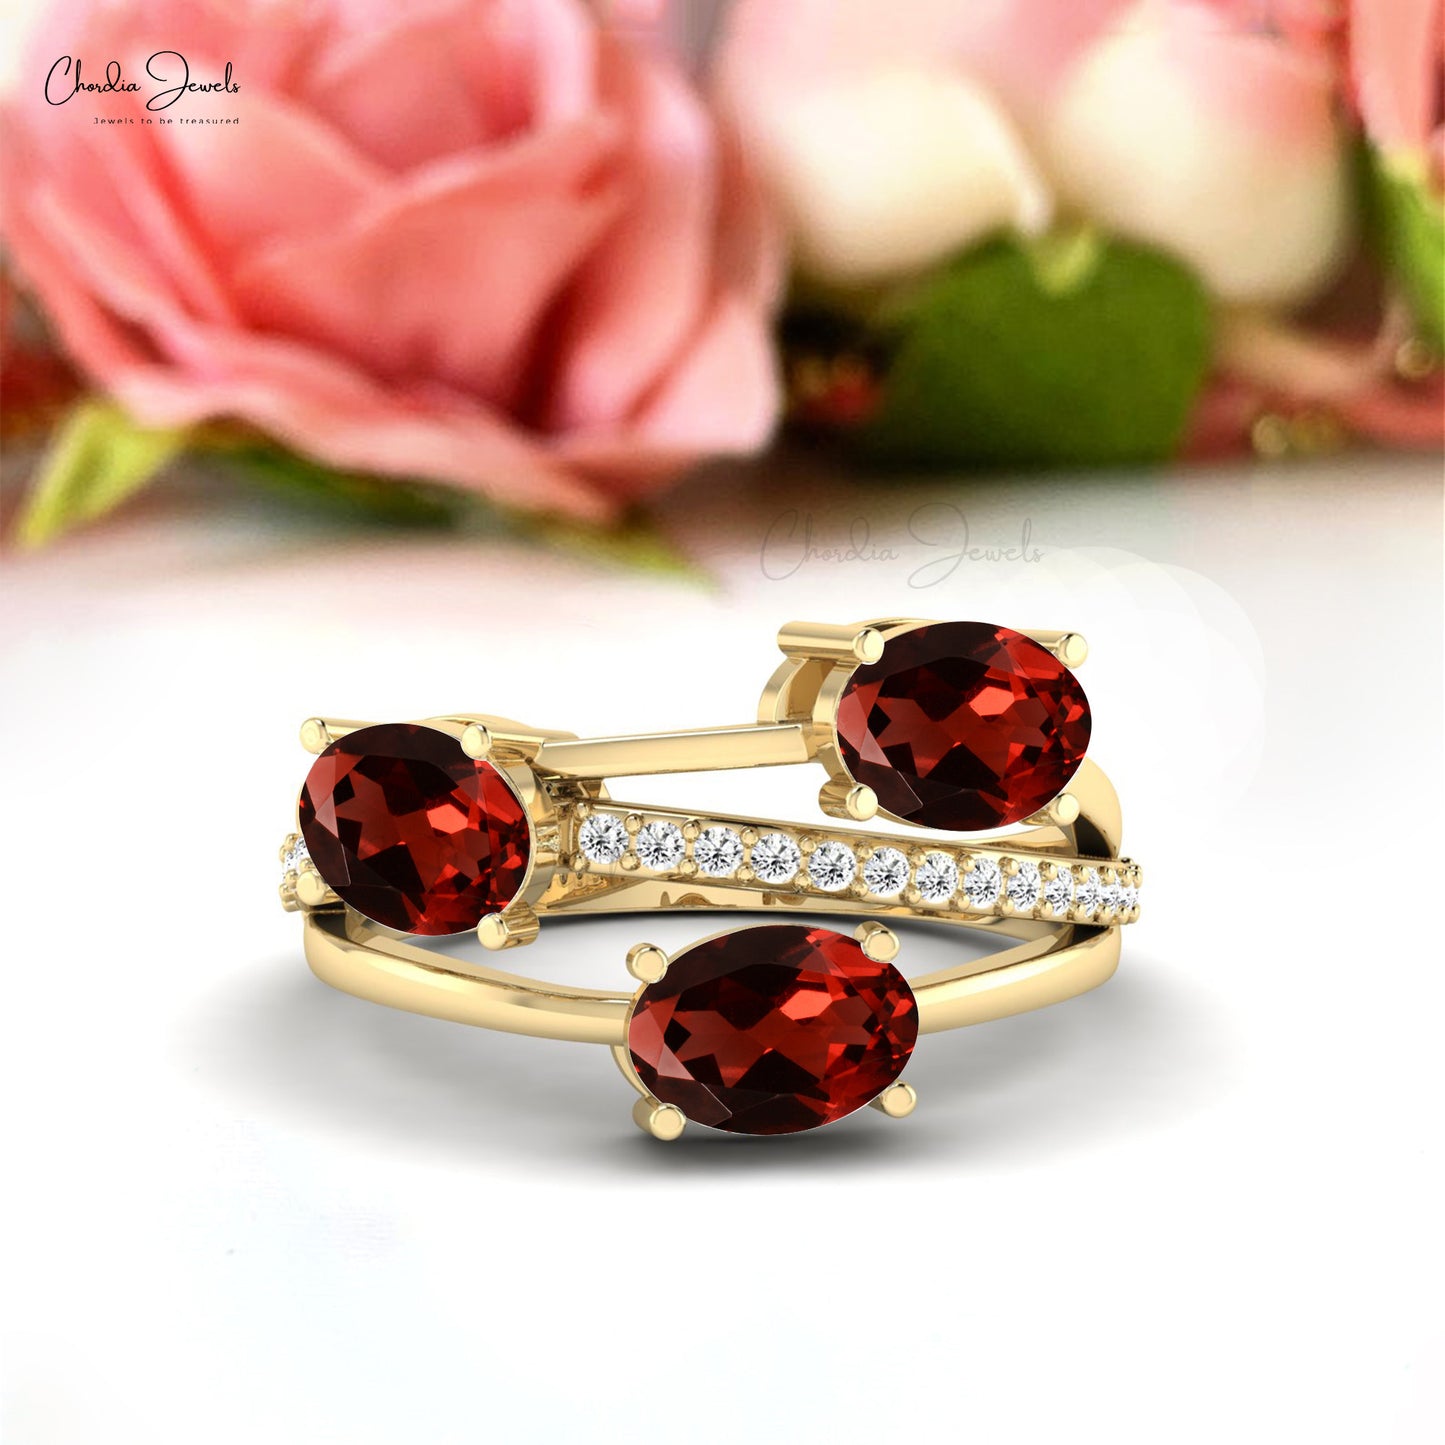 Gold Crossover Wedding Ring with Garnet and Diamond Stones